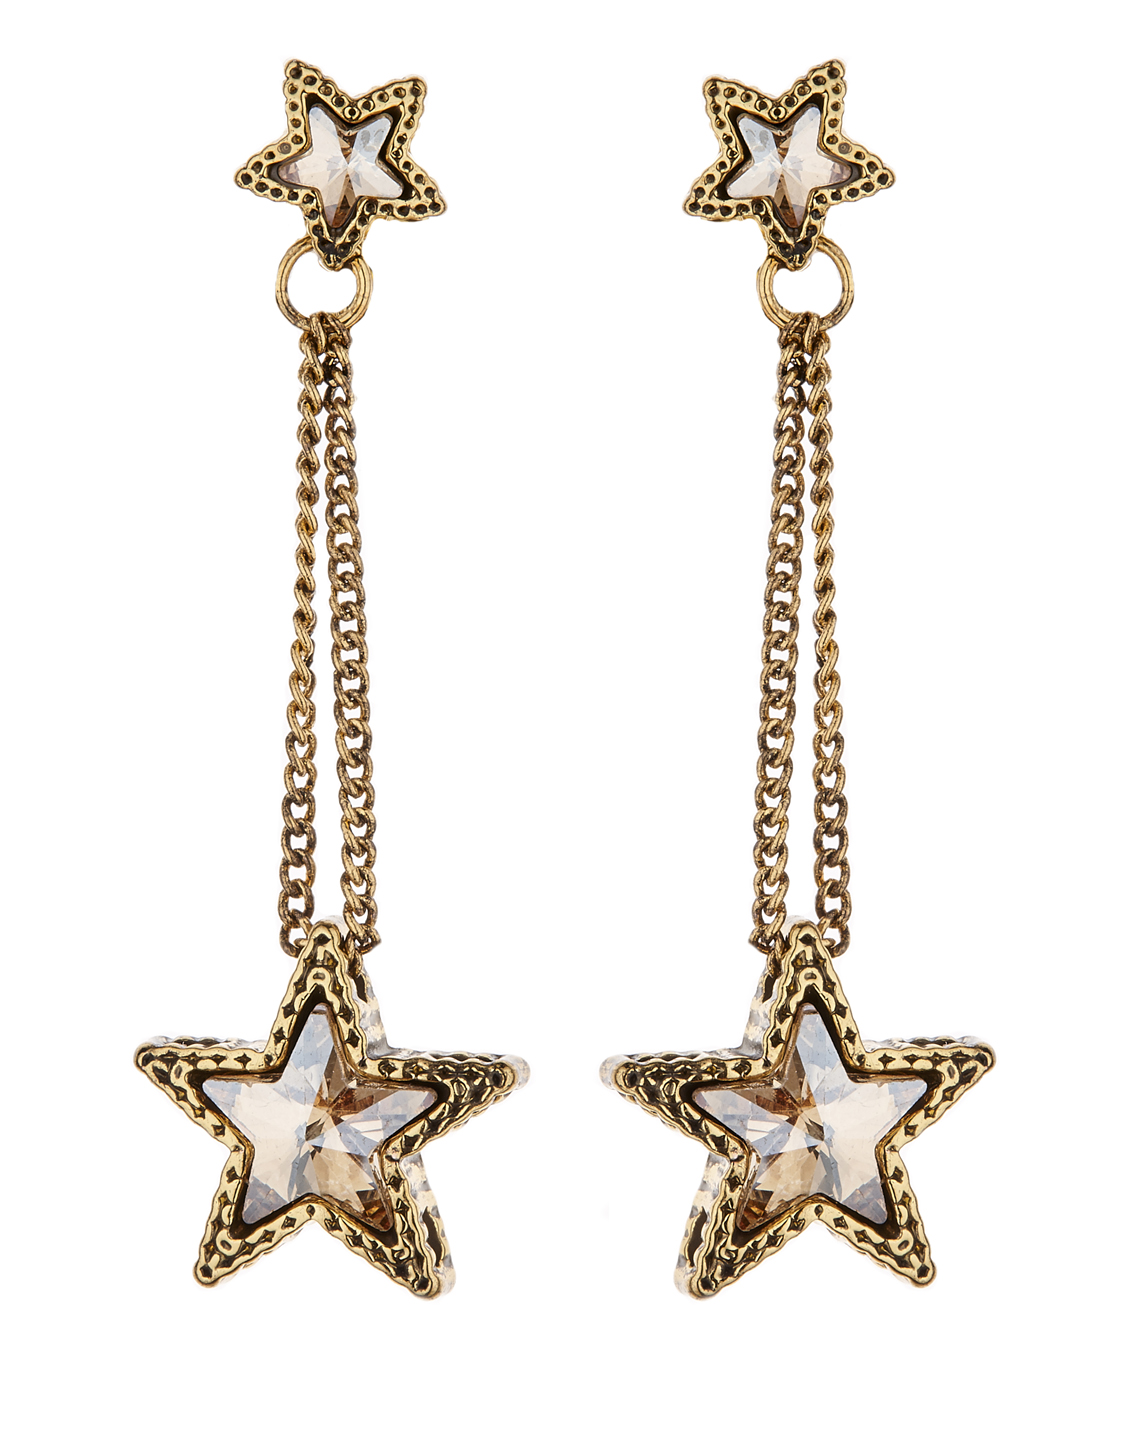 Clip On Earrings - Kalidas G - gold drop earring with crystal stars